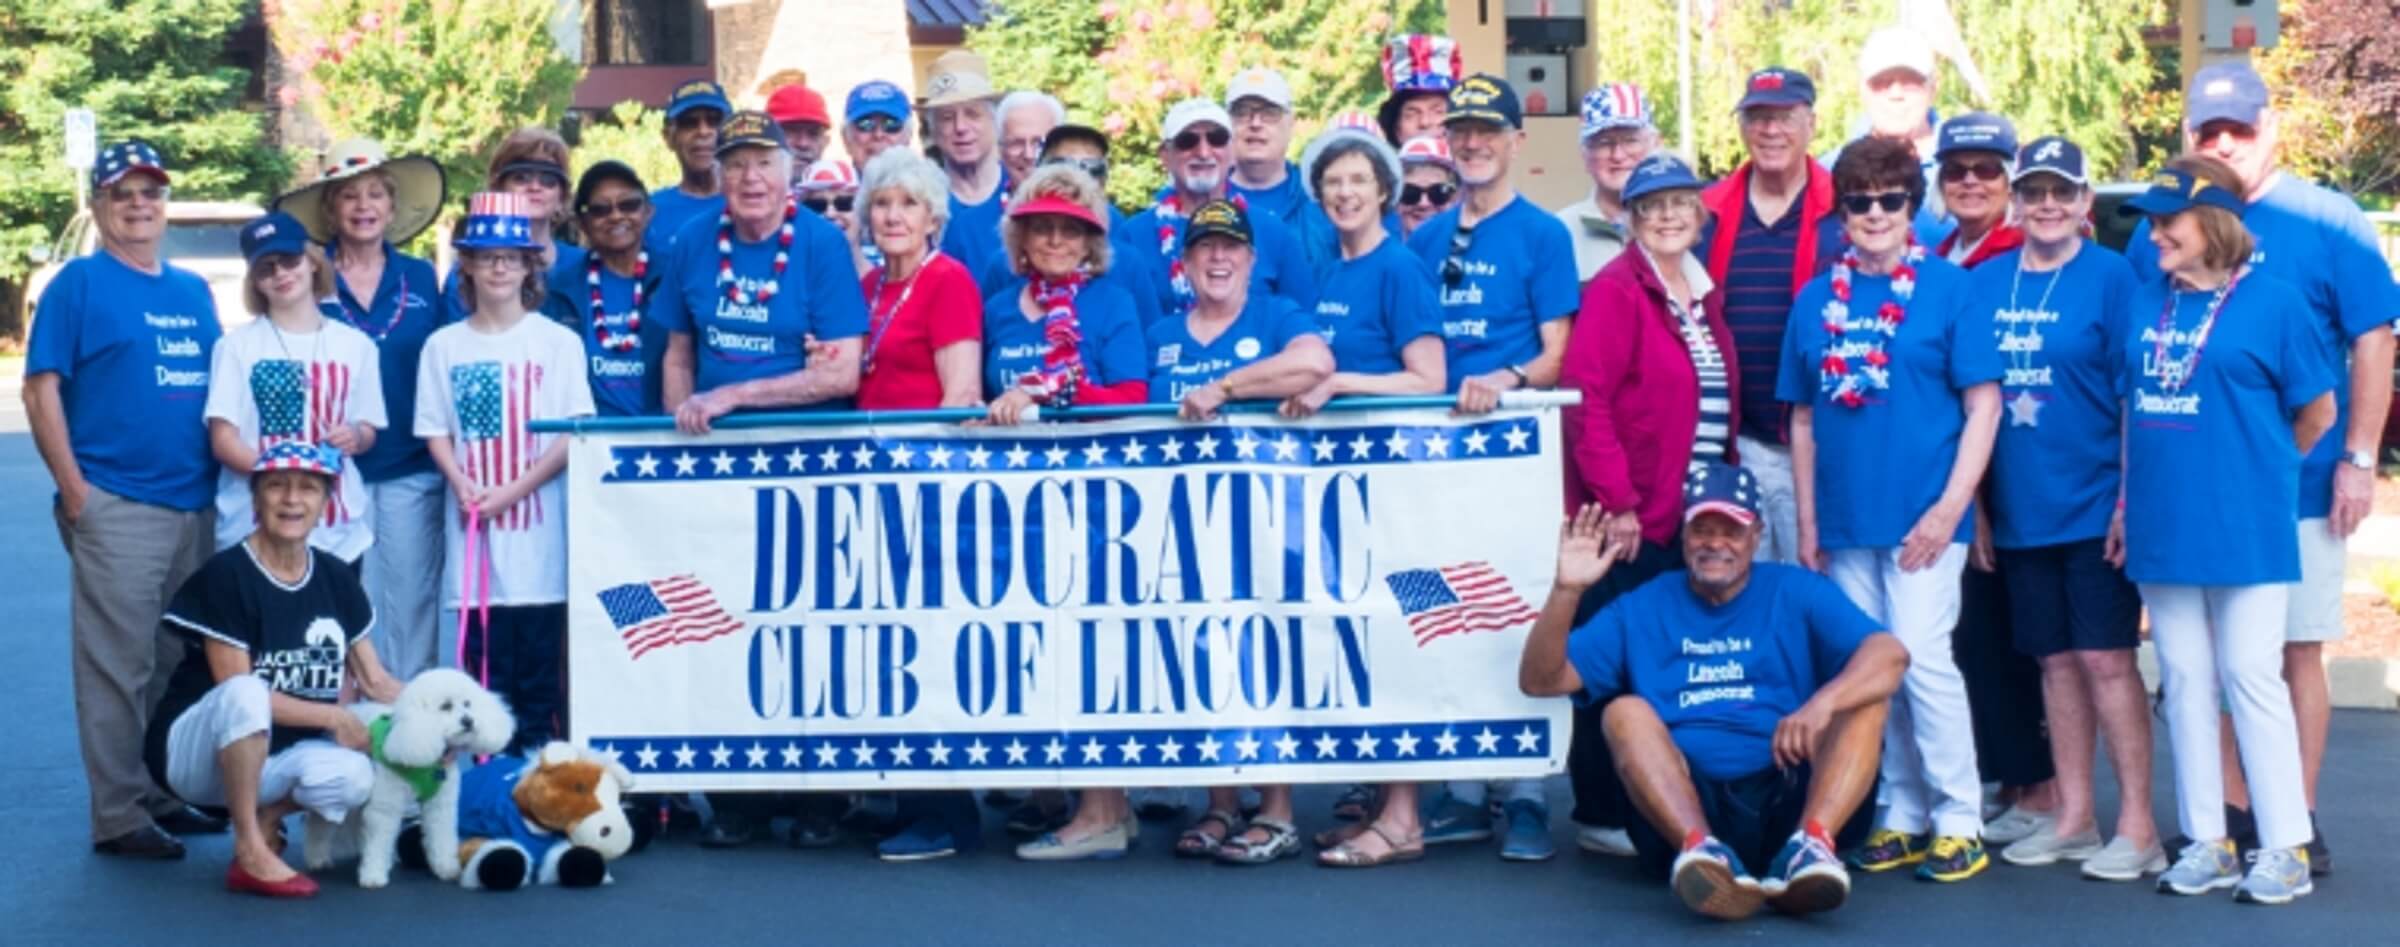 Group of smiling people dressed in patriotic colors holding a banner reading "democratic club of lincoln.